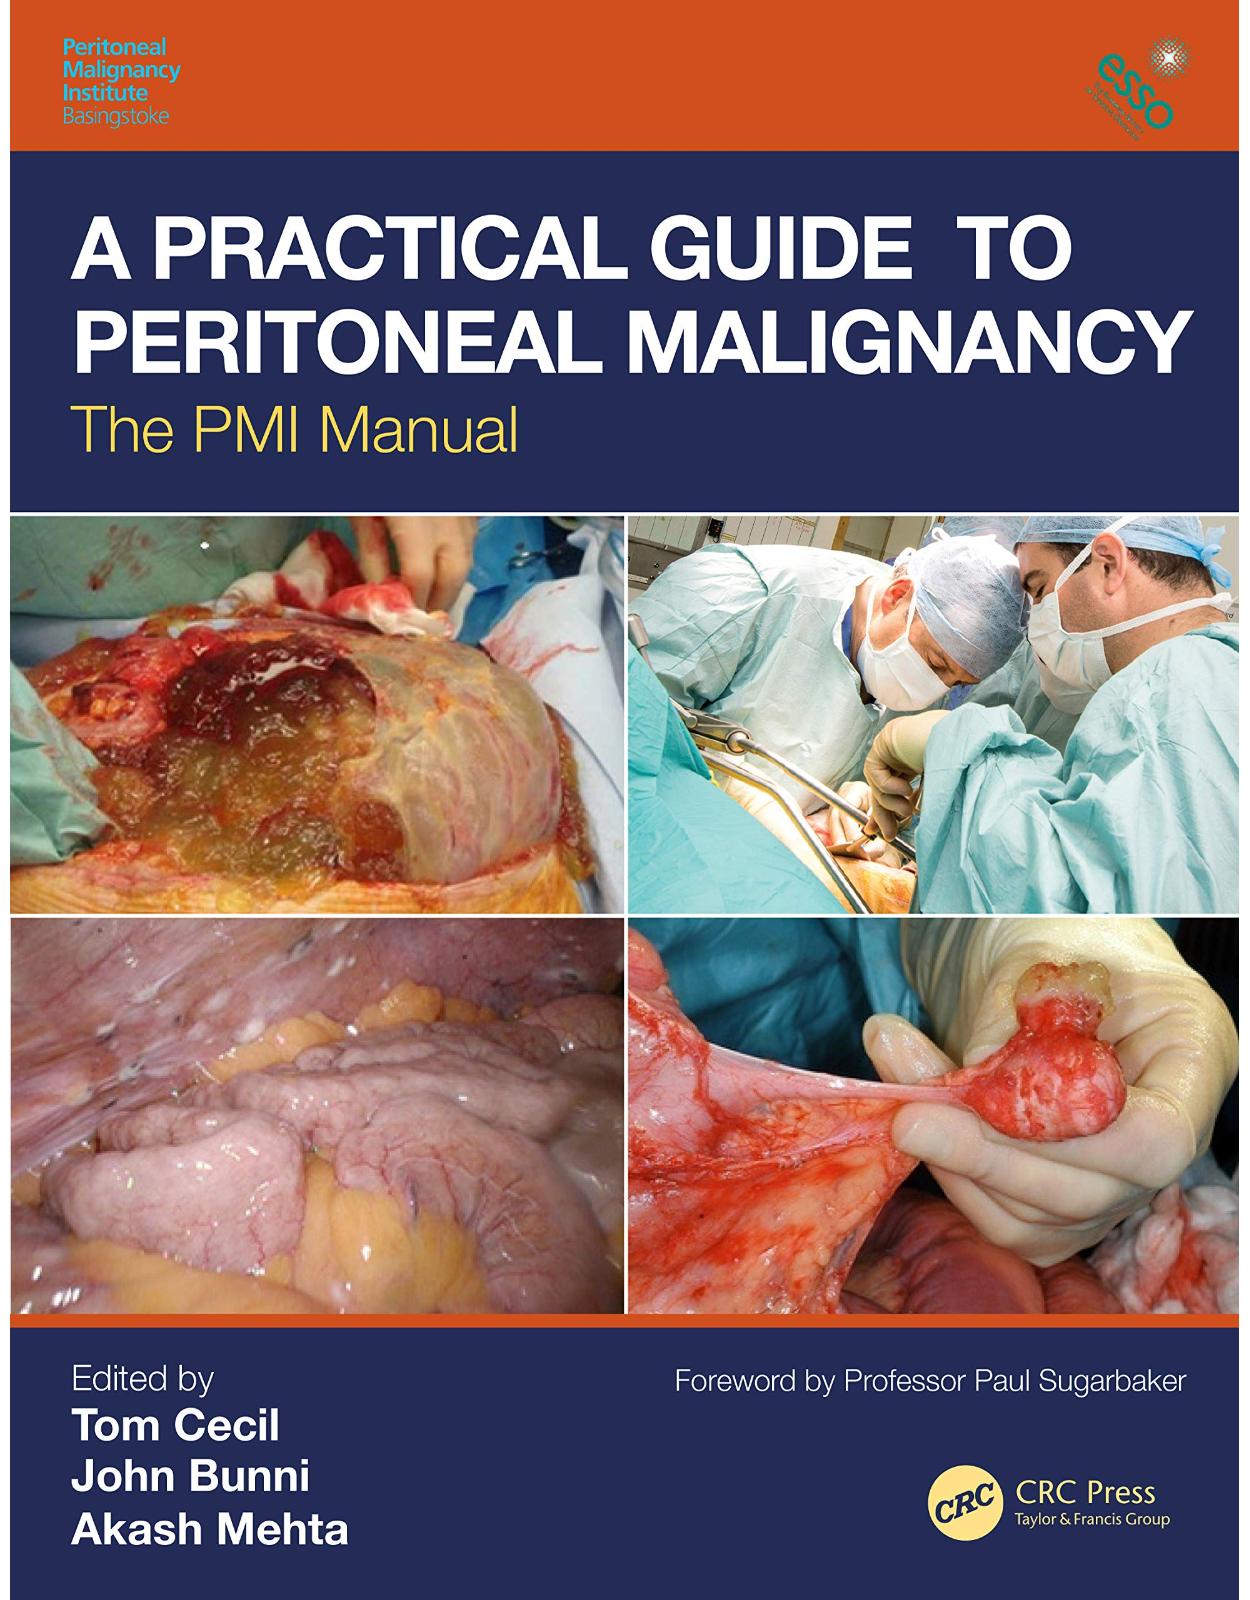 A Practical Guide to Peritoneal Malignancy: The PMI Manual